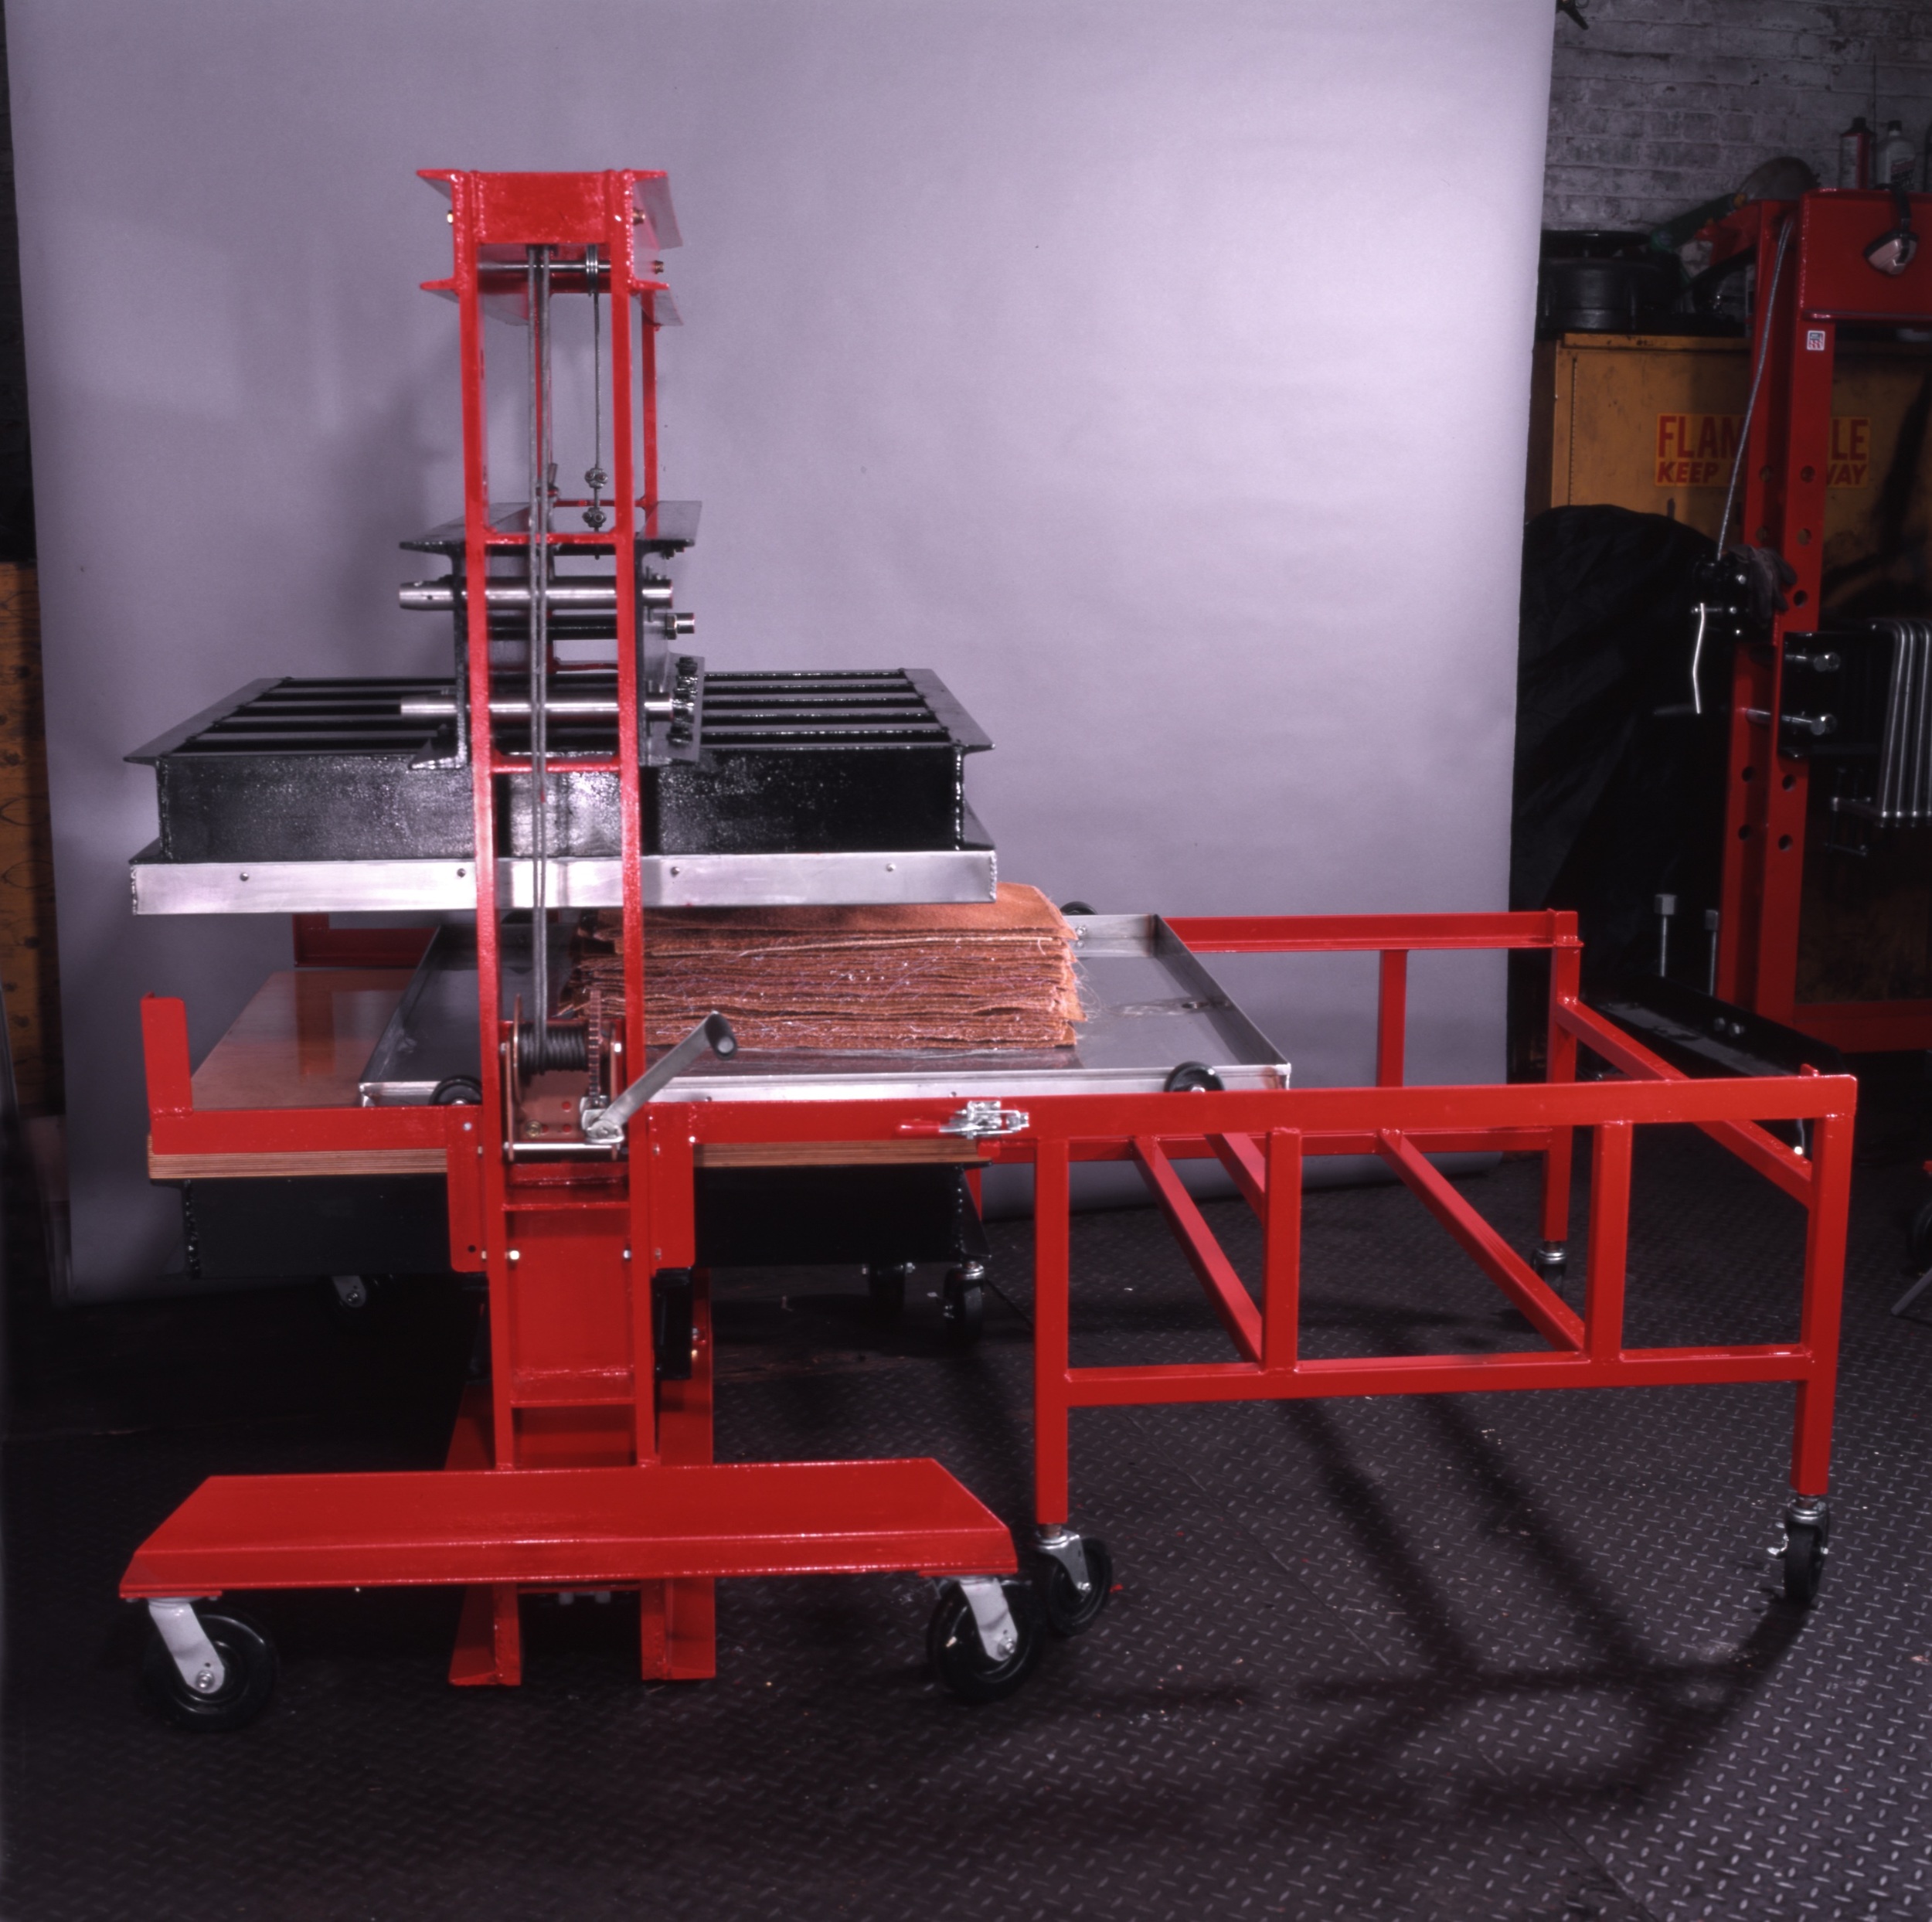 50-ton hydraulic press and rolling cart